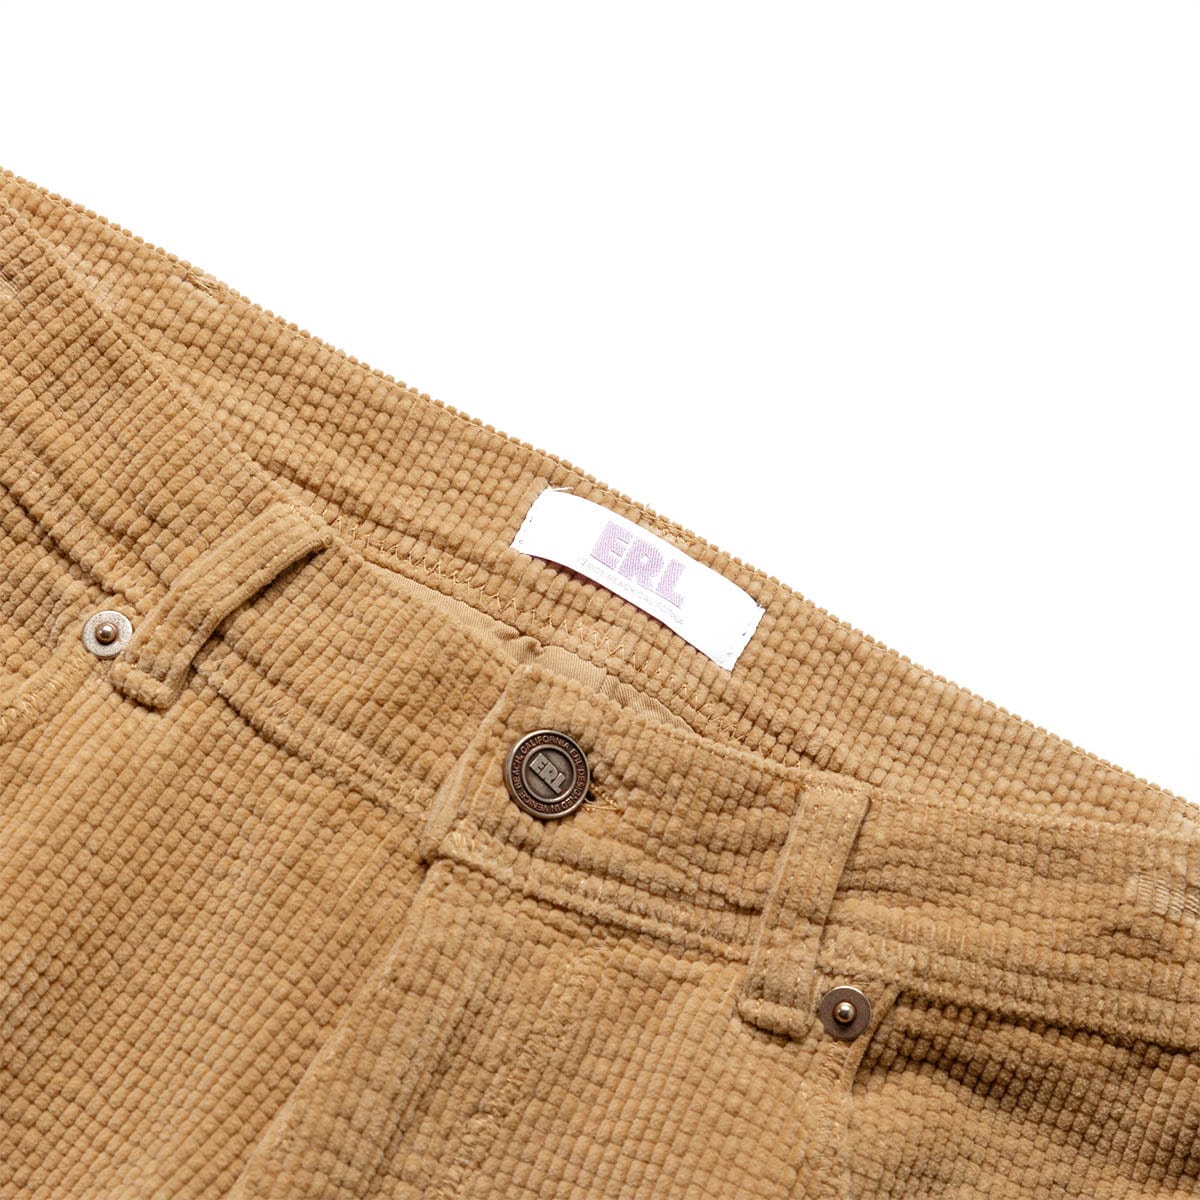 ERL Bottoms FLARED CORDUROY PANTS